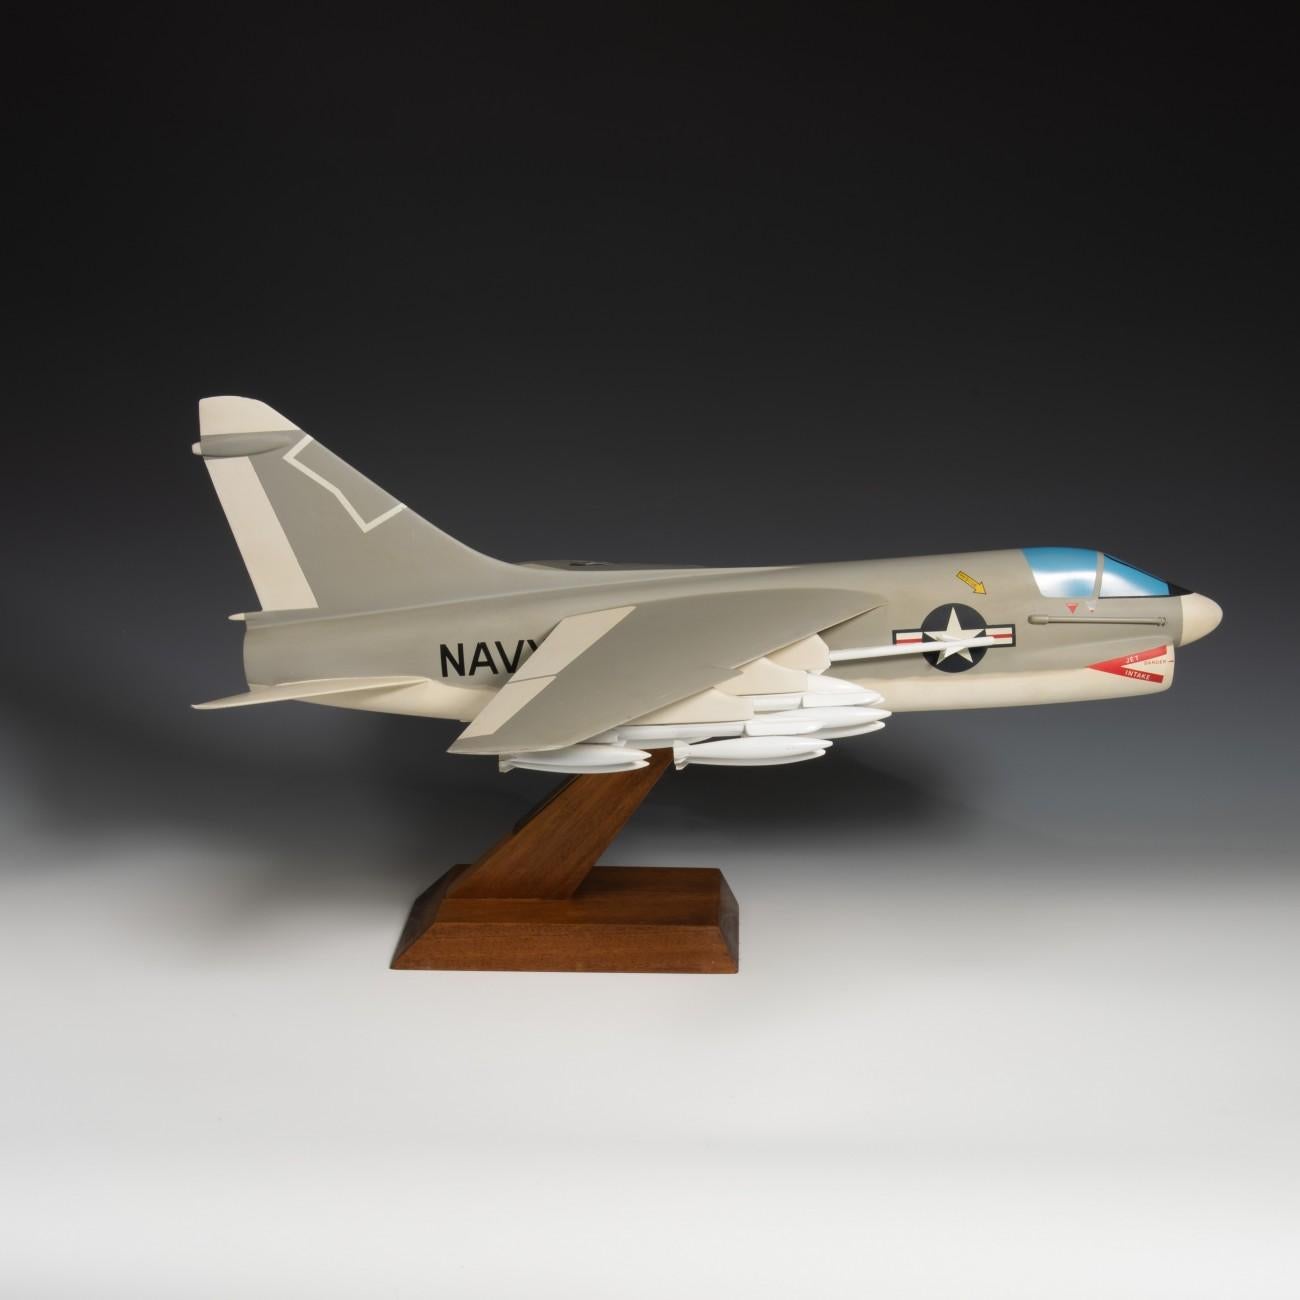 An exceptional painted aluminium and wood naval model of the LTV ( Ling-Temco-Vought) A-7 Corsair II fighter jet airplane. In United States Navy (USN) livery. Made by a celebrated Dutch model maker, Maarten Matthijs Verkuyl, a specialist model maker